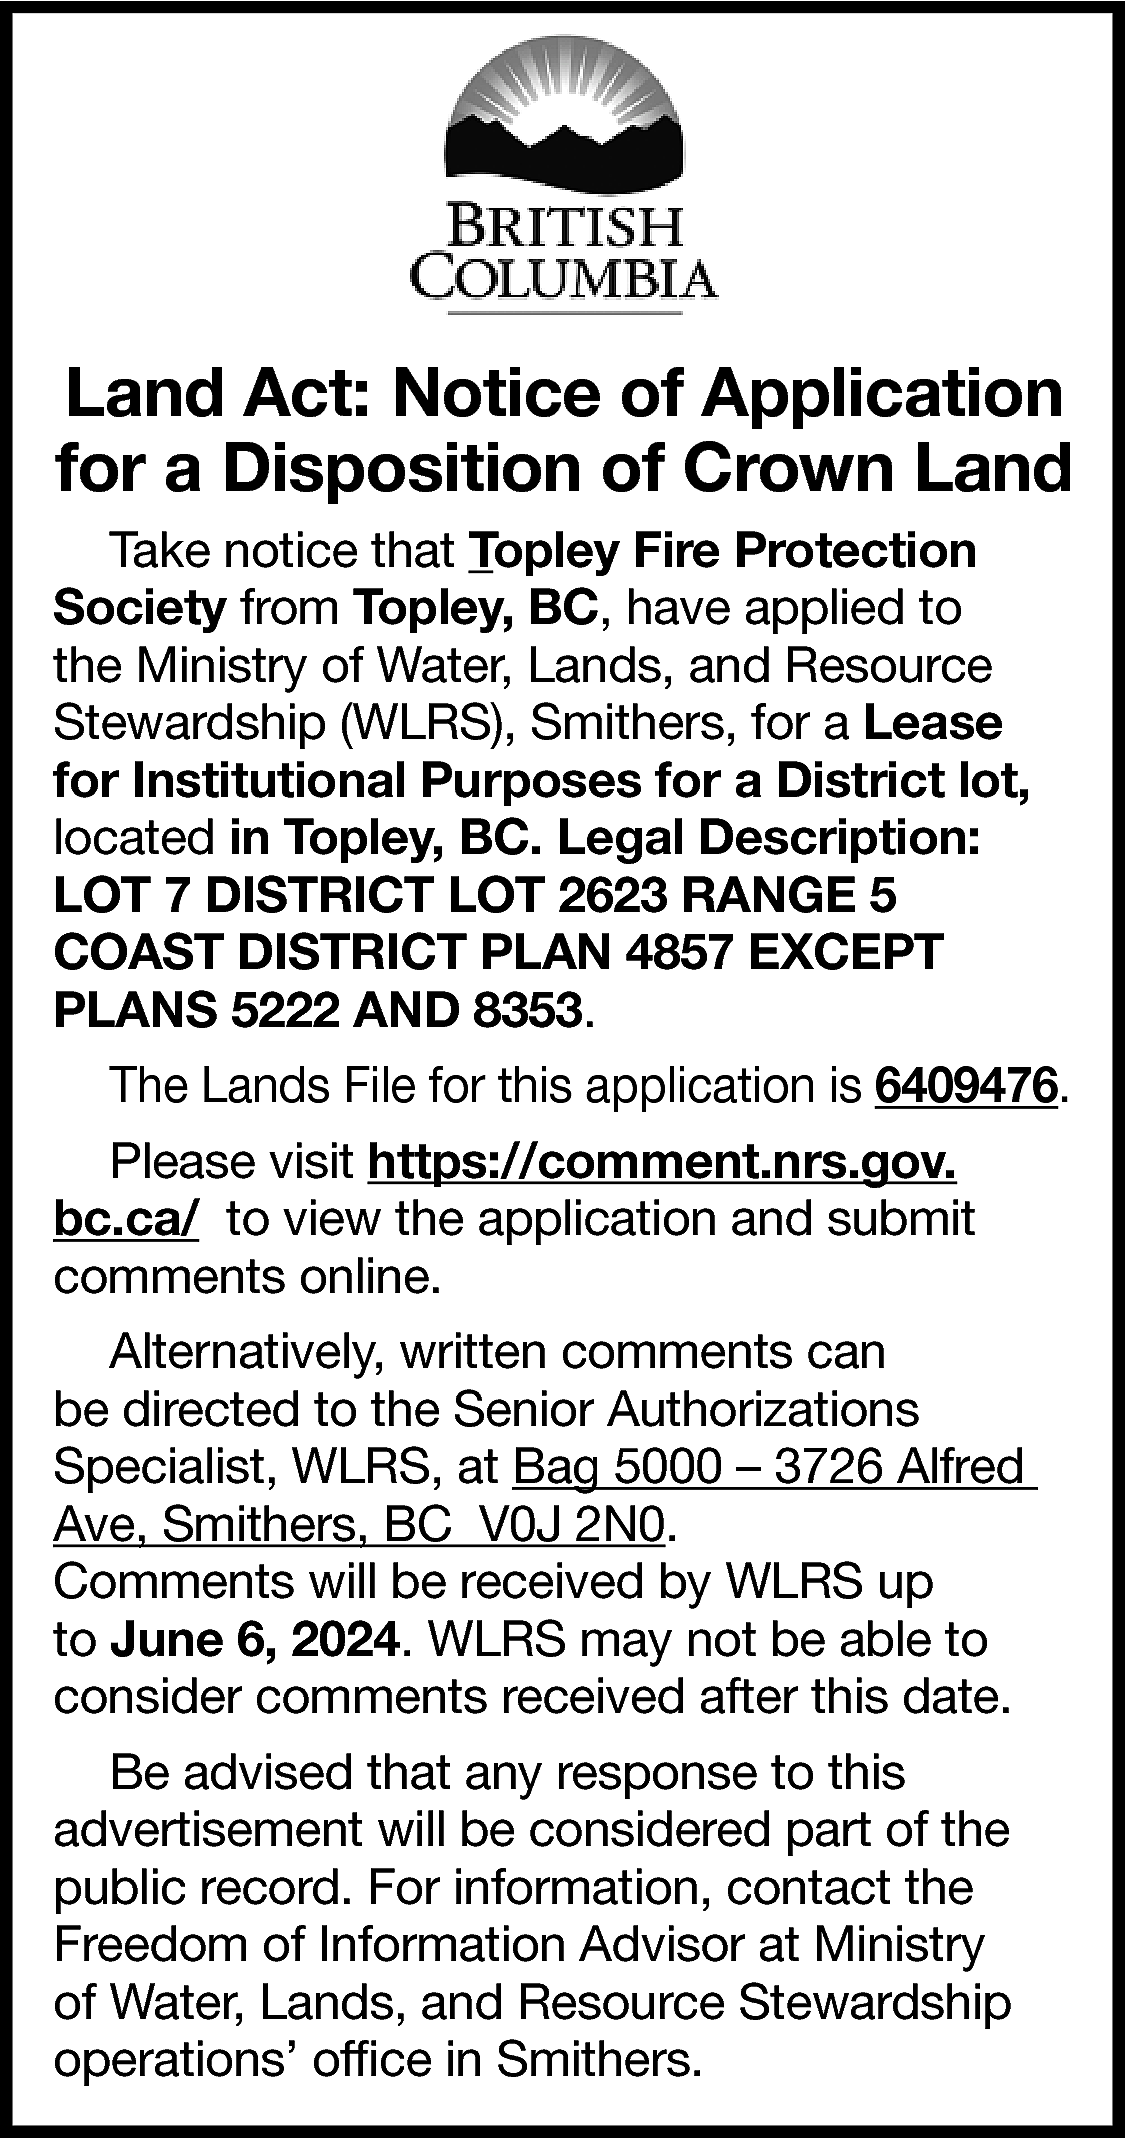 Land Act: Notice of Application  Land Act: Notice of Application  for a Disposition of Crown Land  Take notice that Topley Fire Protection  Society from Topley, BC, have applied to  the Ministry of Water, Lands, and Resource  Stewardship (WLRS), Smithers, for a Lease  for Institutional Purposes for a District lot,  located in Topley, BC. Legal Description:  LOT 7 DISTRICT LOT 2623 RANGE 5  COAST DISTRICT PLAN 4857 EXCEPT  PLANS 5222 AND 8353.  The Lands File for this application is 6409476.  Please visit https://comment.nrs.gov.  bc.ca/ to view the application and submit  comments online.  Alternatively, written comments can  be directed to the Senior Authorizations  Specialist, WLRS, at Bag 5000 – 3726 Alfred  Ave, Smithers, BC V0J 2N0.  Comments will be received by WLRS up  to June 6, 2024. WLRS may not be able to  consider comments received after this date.  Be advised that any response to this  advertisement will be considered part of the  public record. For information, contact the  Freedom of Information Advisor at Ministry  of Water, Lands, and Resource Stewardship  operations’ office in Smithers.    